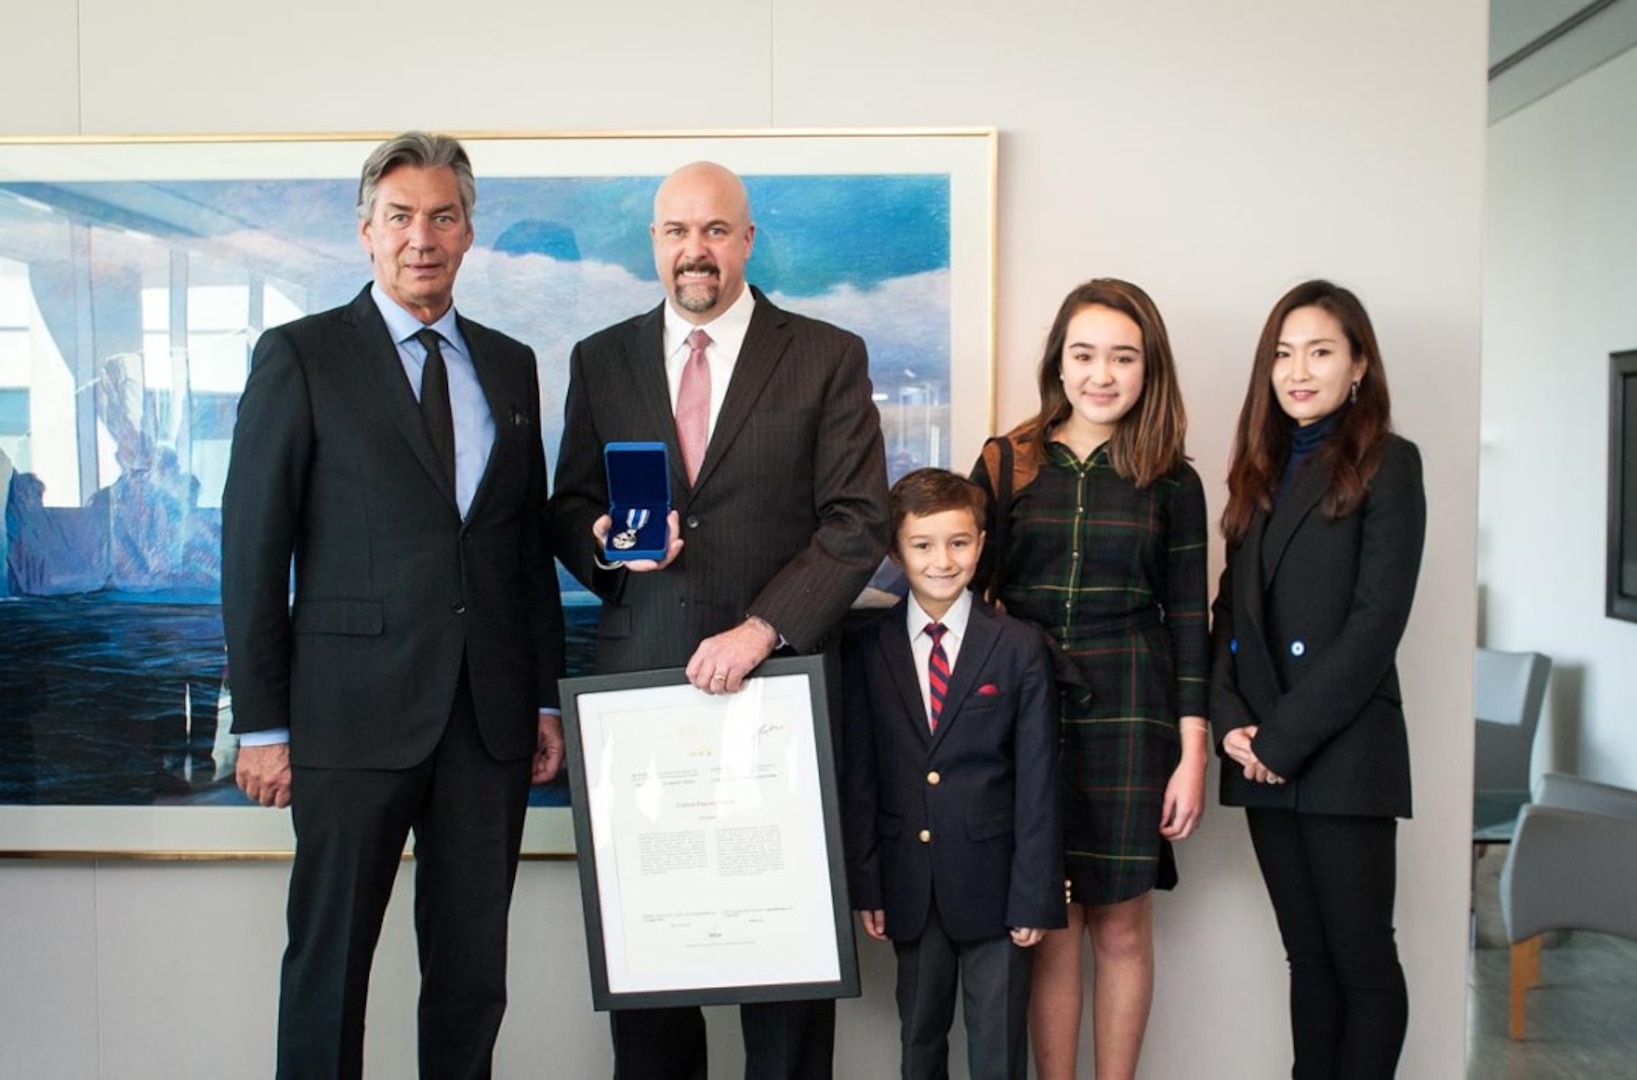 Joint Logistics Operations Center Executive Officer and retired Army Col. Eugene Shearer (second from left) and his family joined Canadian Ambassador to the United States Gary Doer (left) at the Canadian Embassy in Washington, D.C., Dec. 15.  Ambassador Doer presented the Canadian Meritorious Service Medal to Shearer for his service on behalf of Canadians as chief of the Combined Joint Logistics Branch within Regional Command South, Afghanistan, from May 2010 to June 2011. Photo by Keegan Bursaw